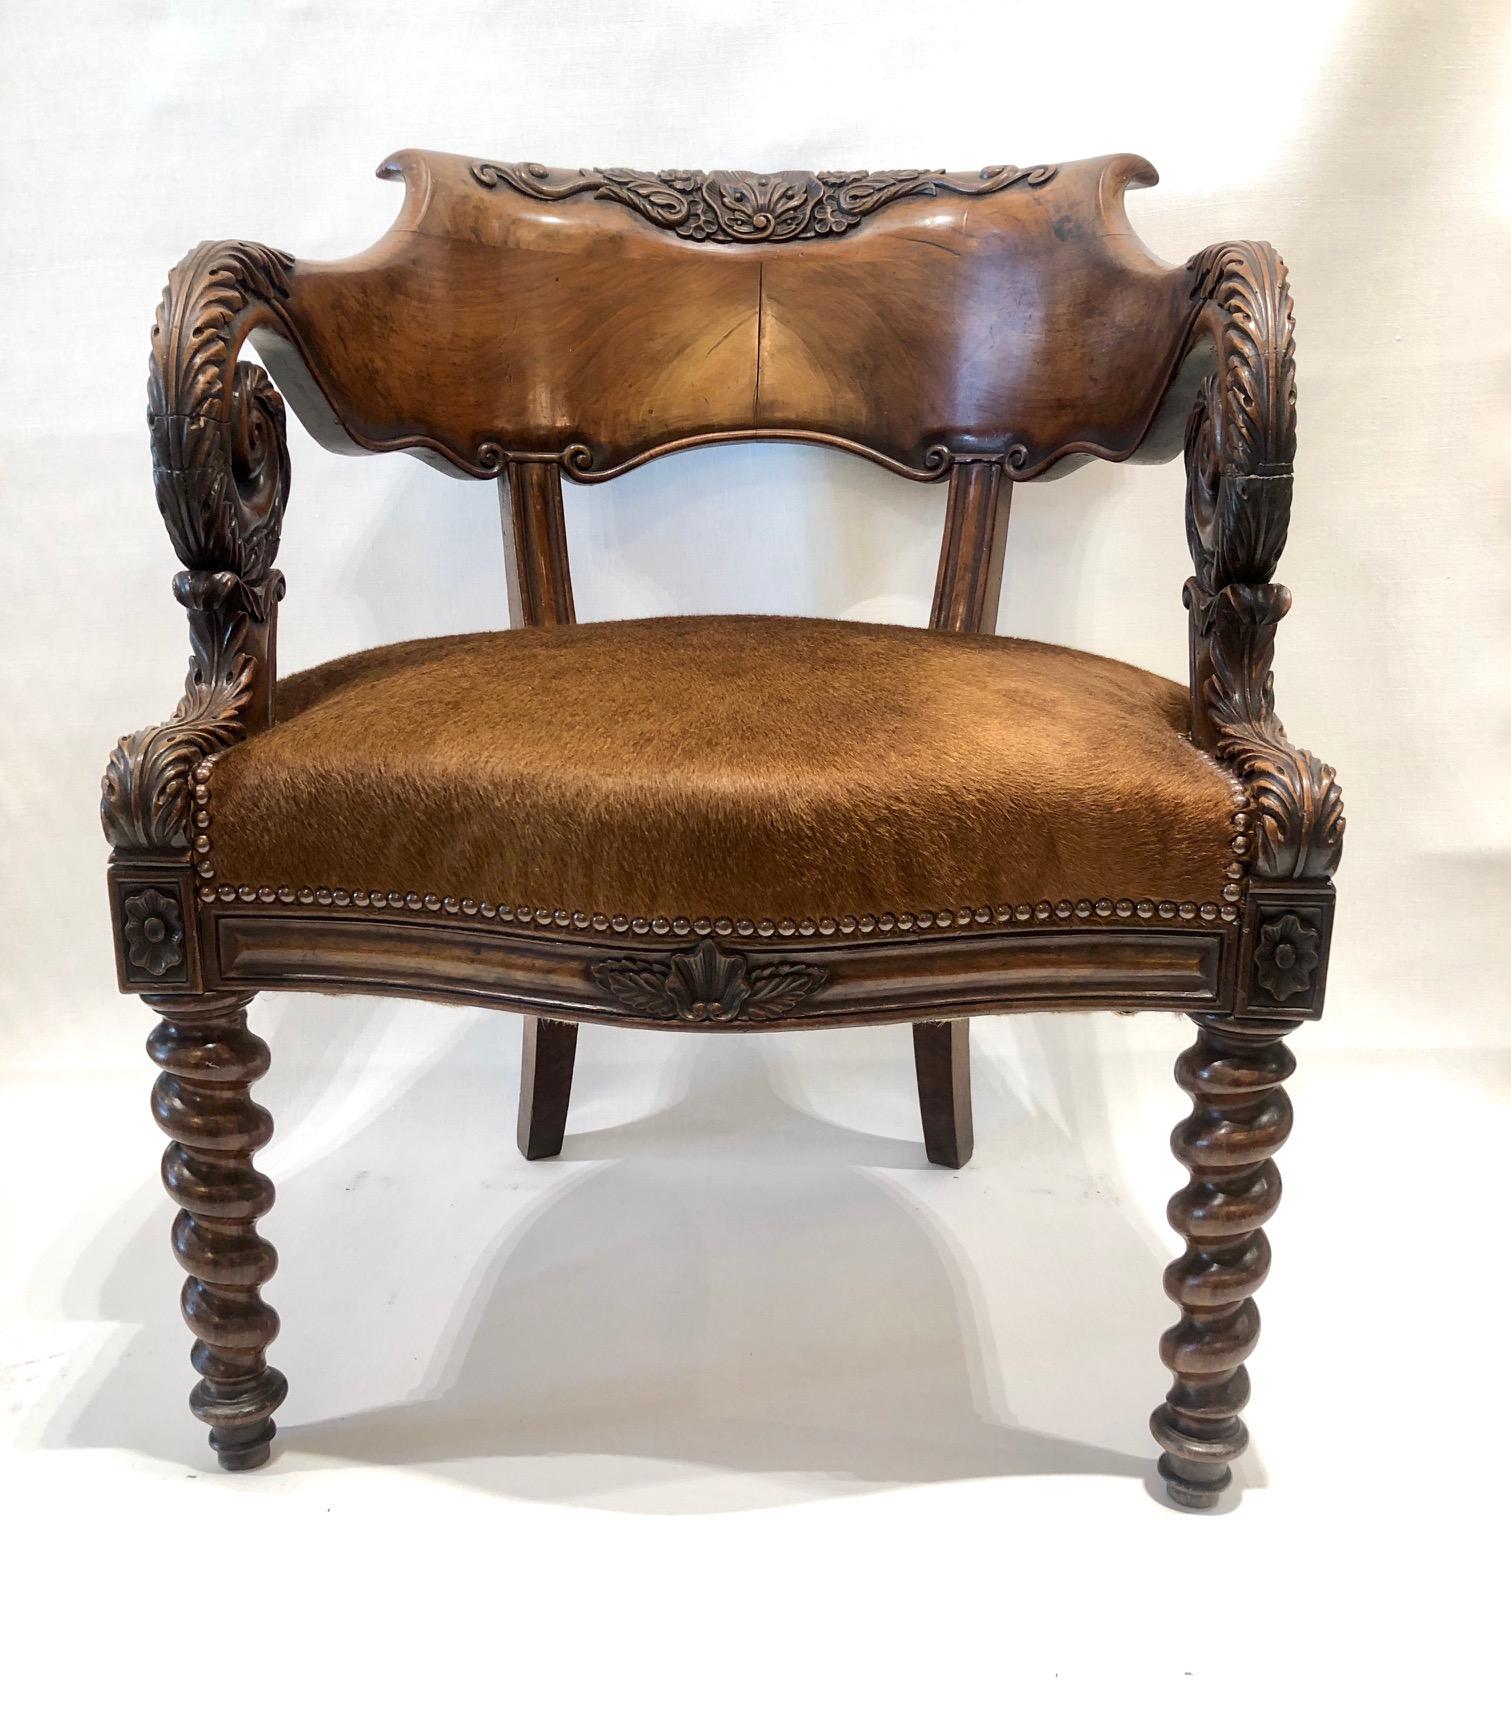 French desk chair, Louis Philippe, circa 1845
Period carved walnut desk chair in excellent condition with cowhide studded seat.